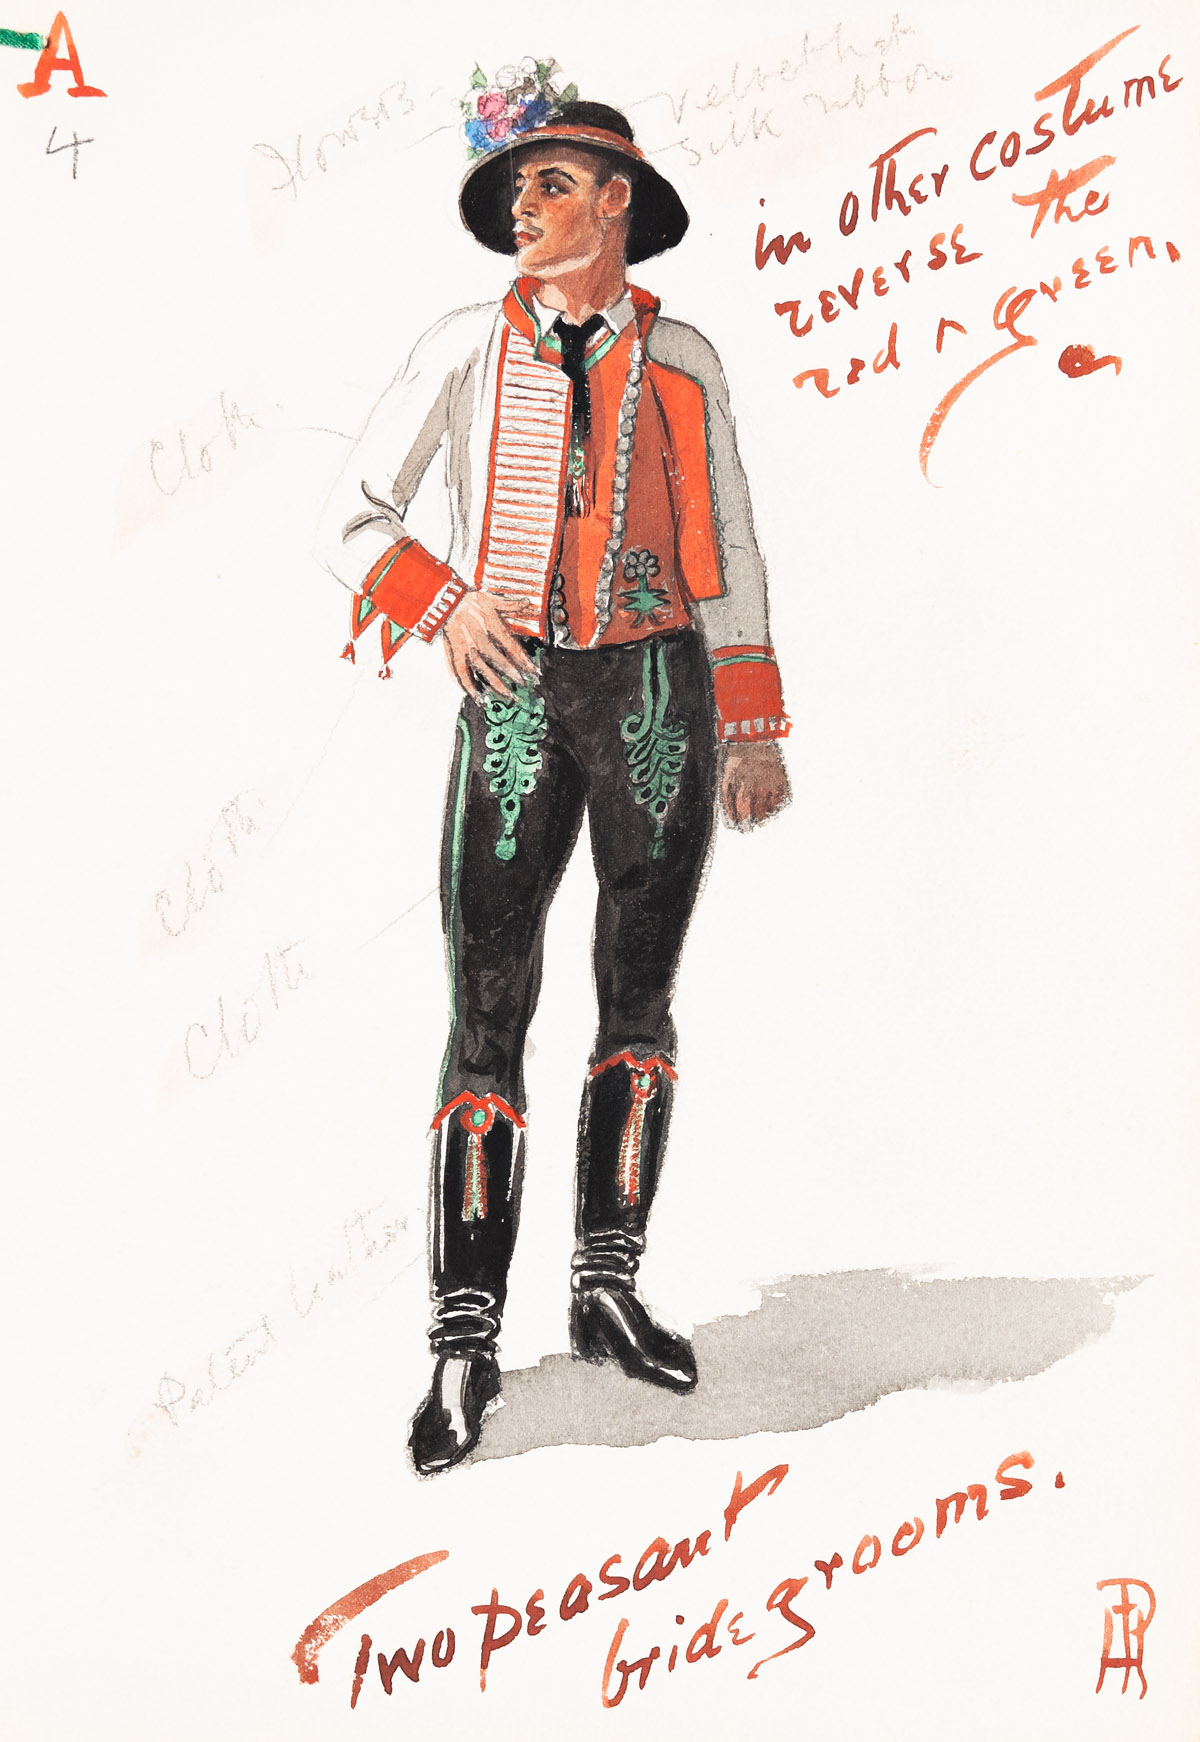 PERCY ANDERSON (1851-1928) Archive of 101 costume designs and related correspondence for the play Kassa. [THEATER]